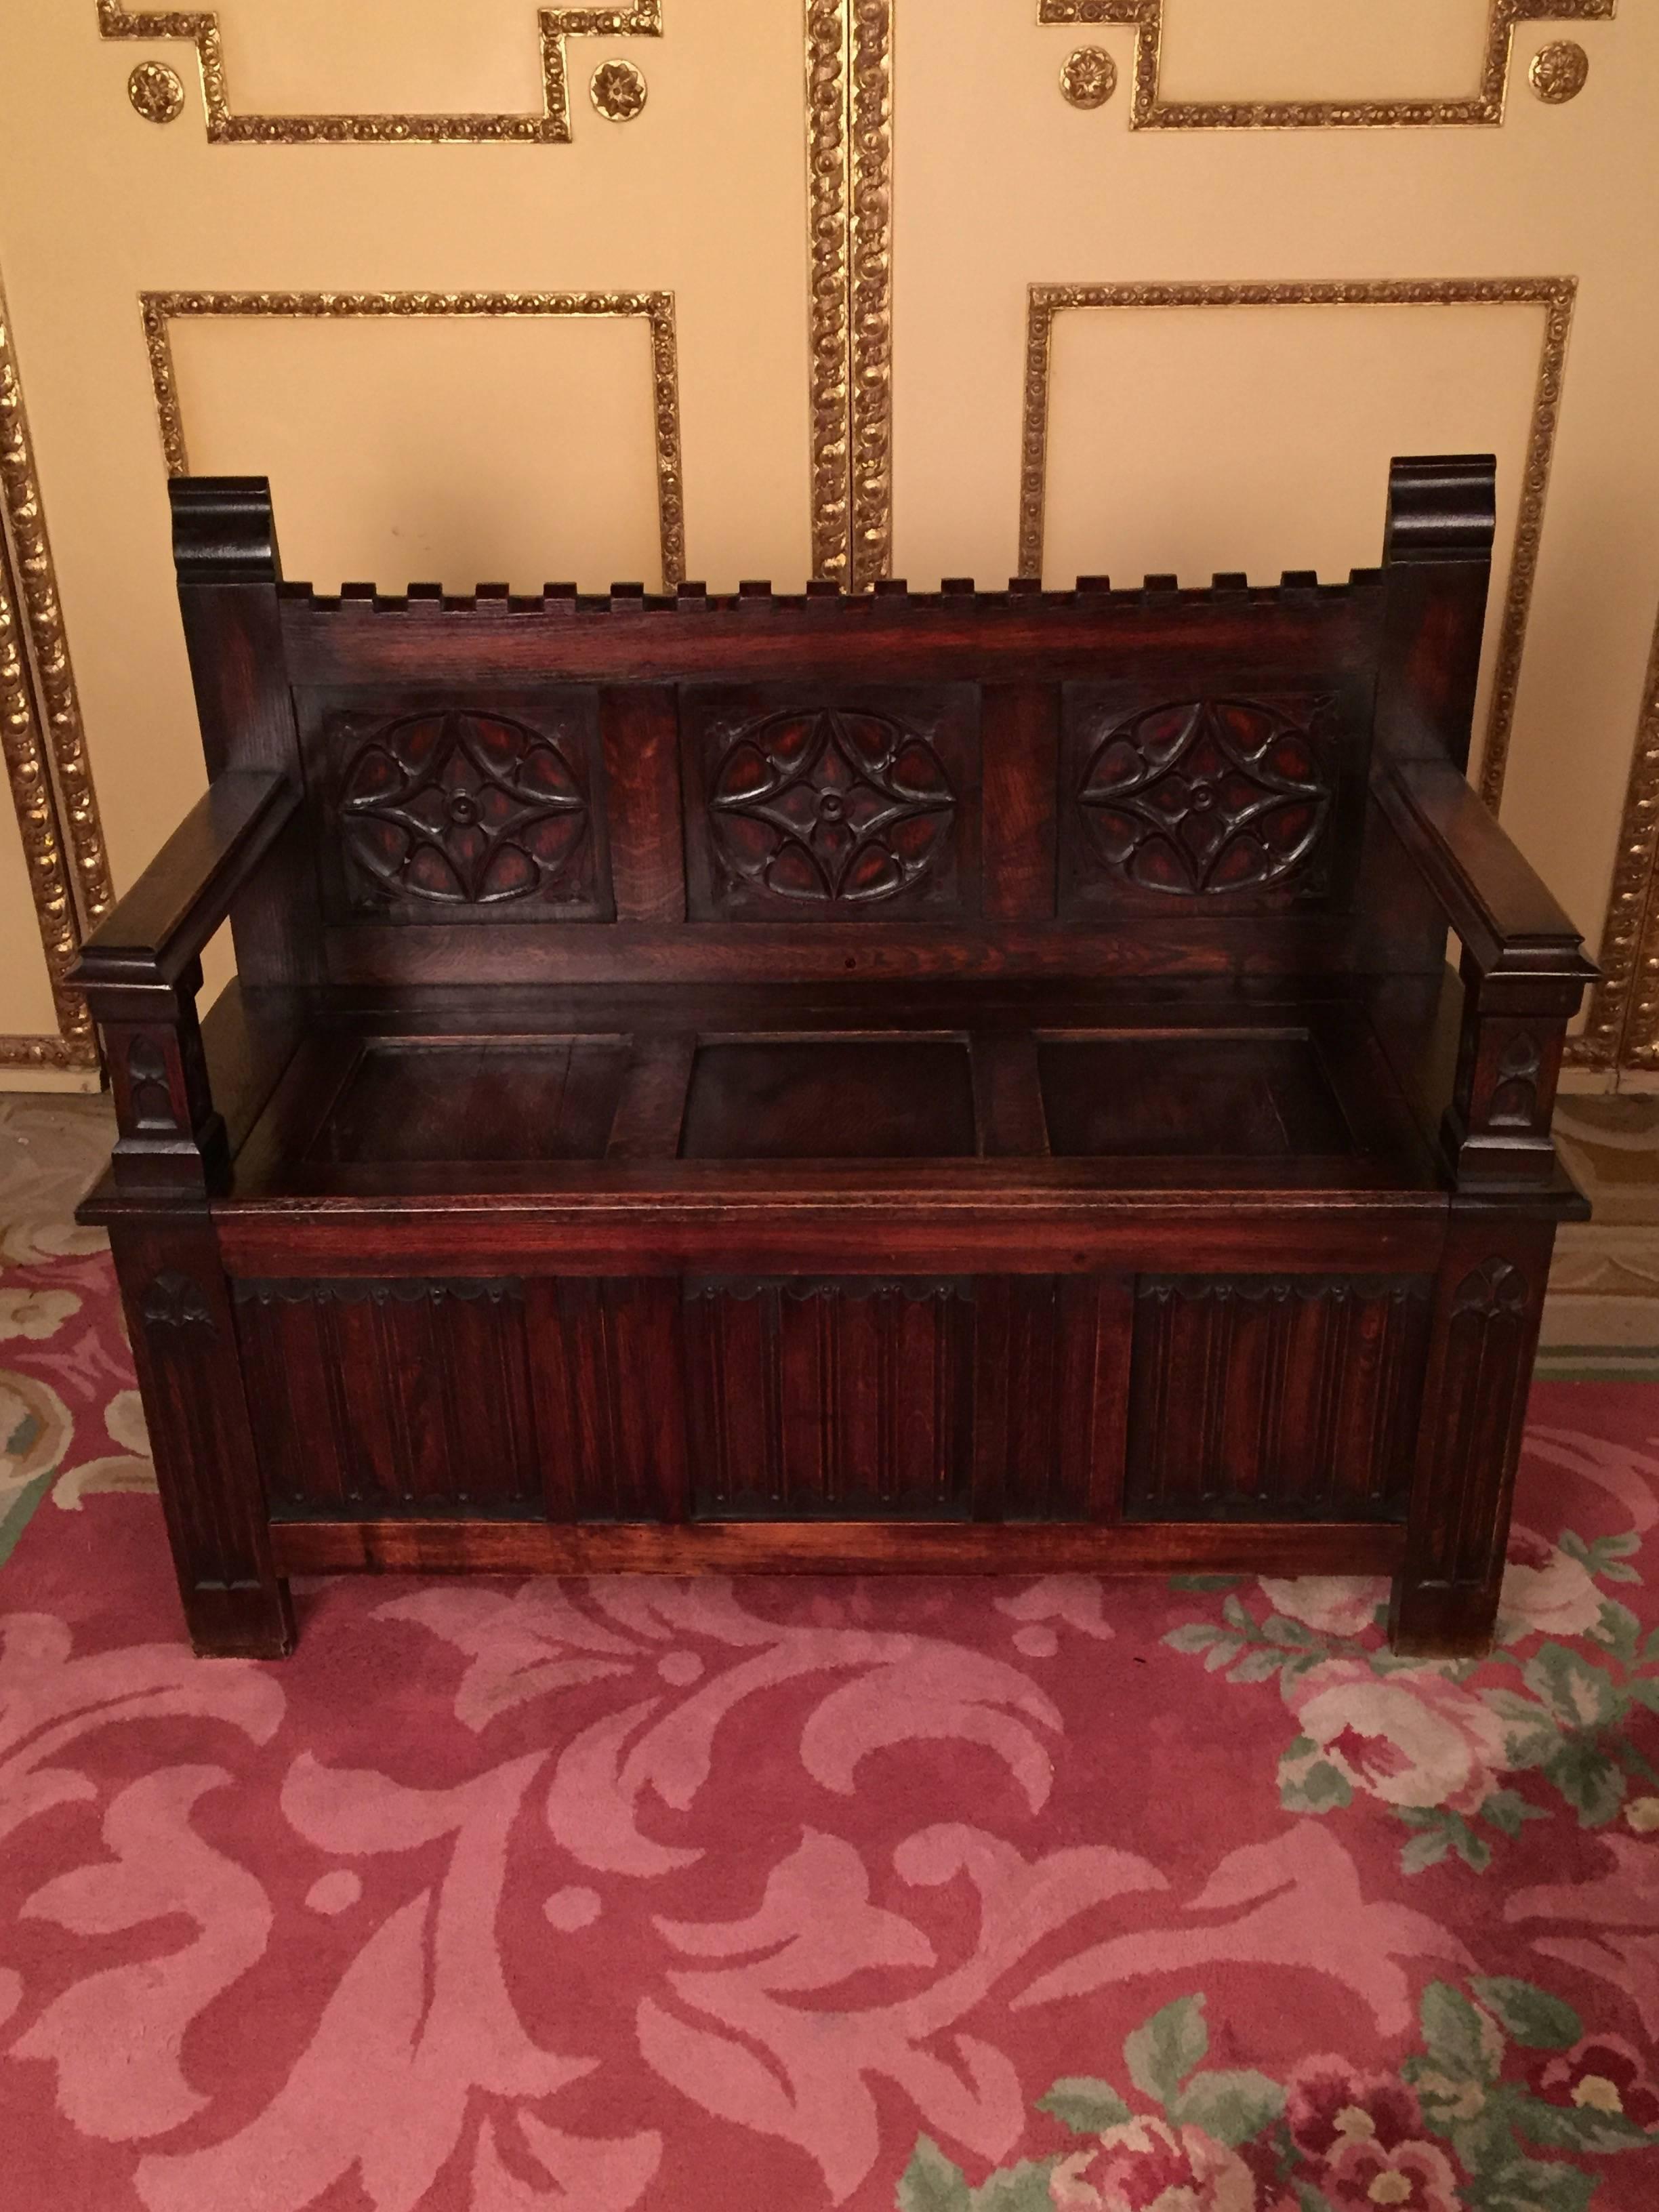 Solid dark oak with Gothic carvings. Foldable seat.
The bench offers a large storage space. Extremely high-quality carving.
Very decorative and impressive
High backrest with armrests.


(B-141)